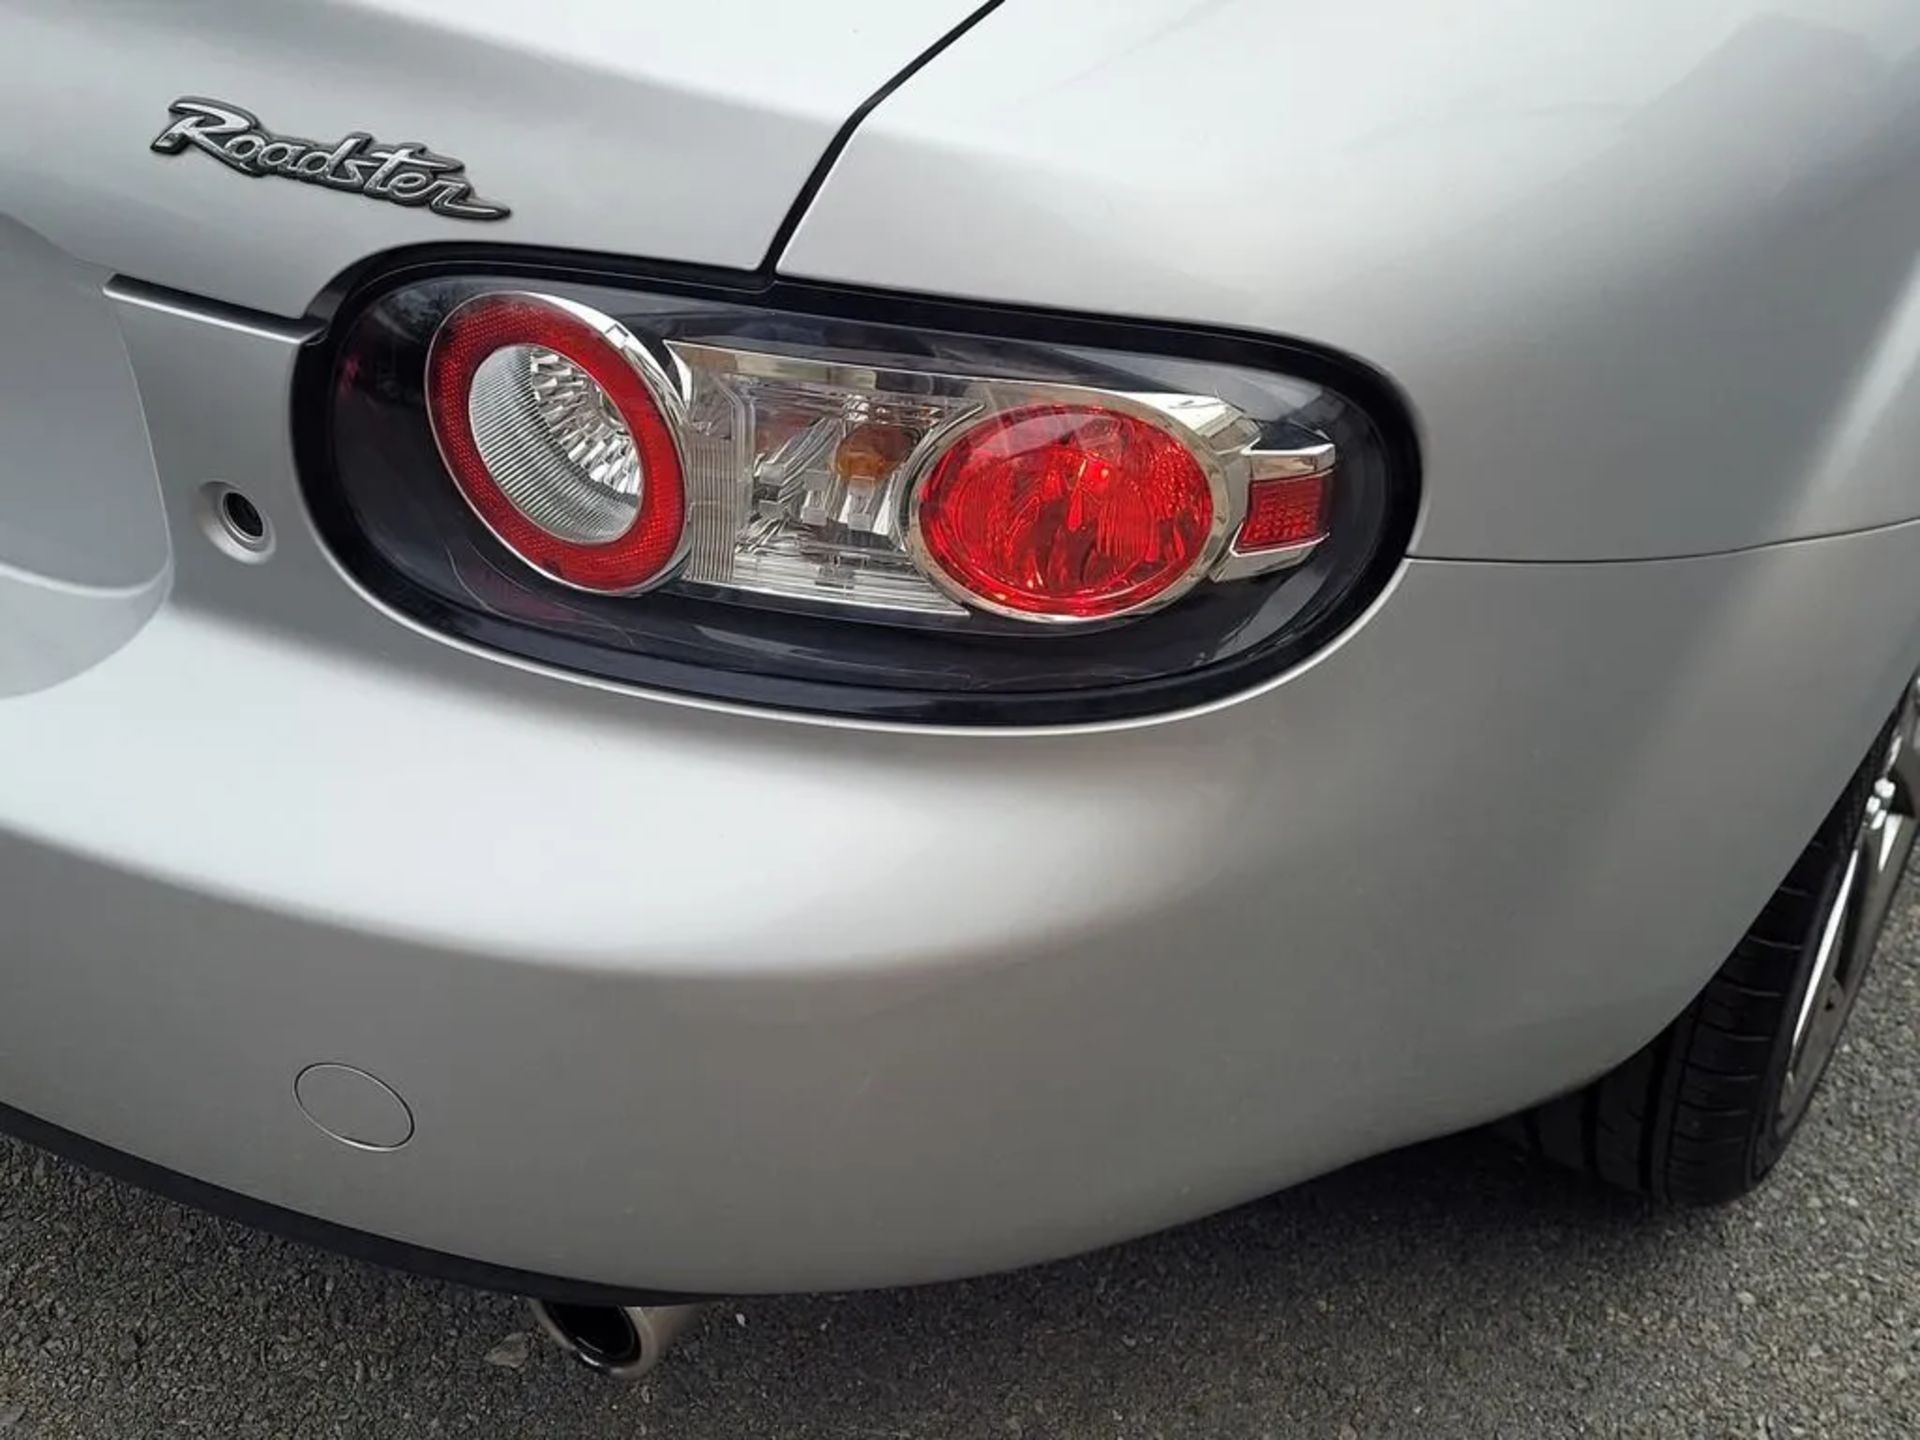 2007 Mazda MX-5 Roadster Freshly Imported From Tokyo Japan. - Image 18 of 20